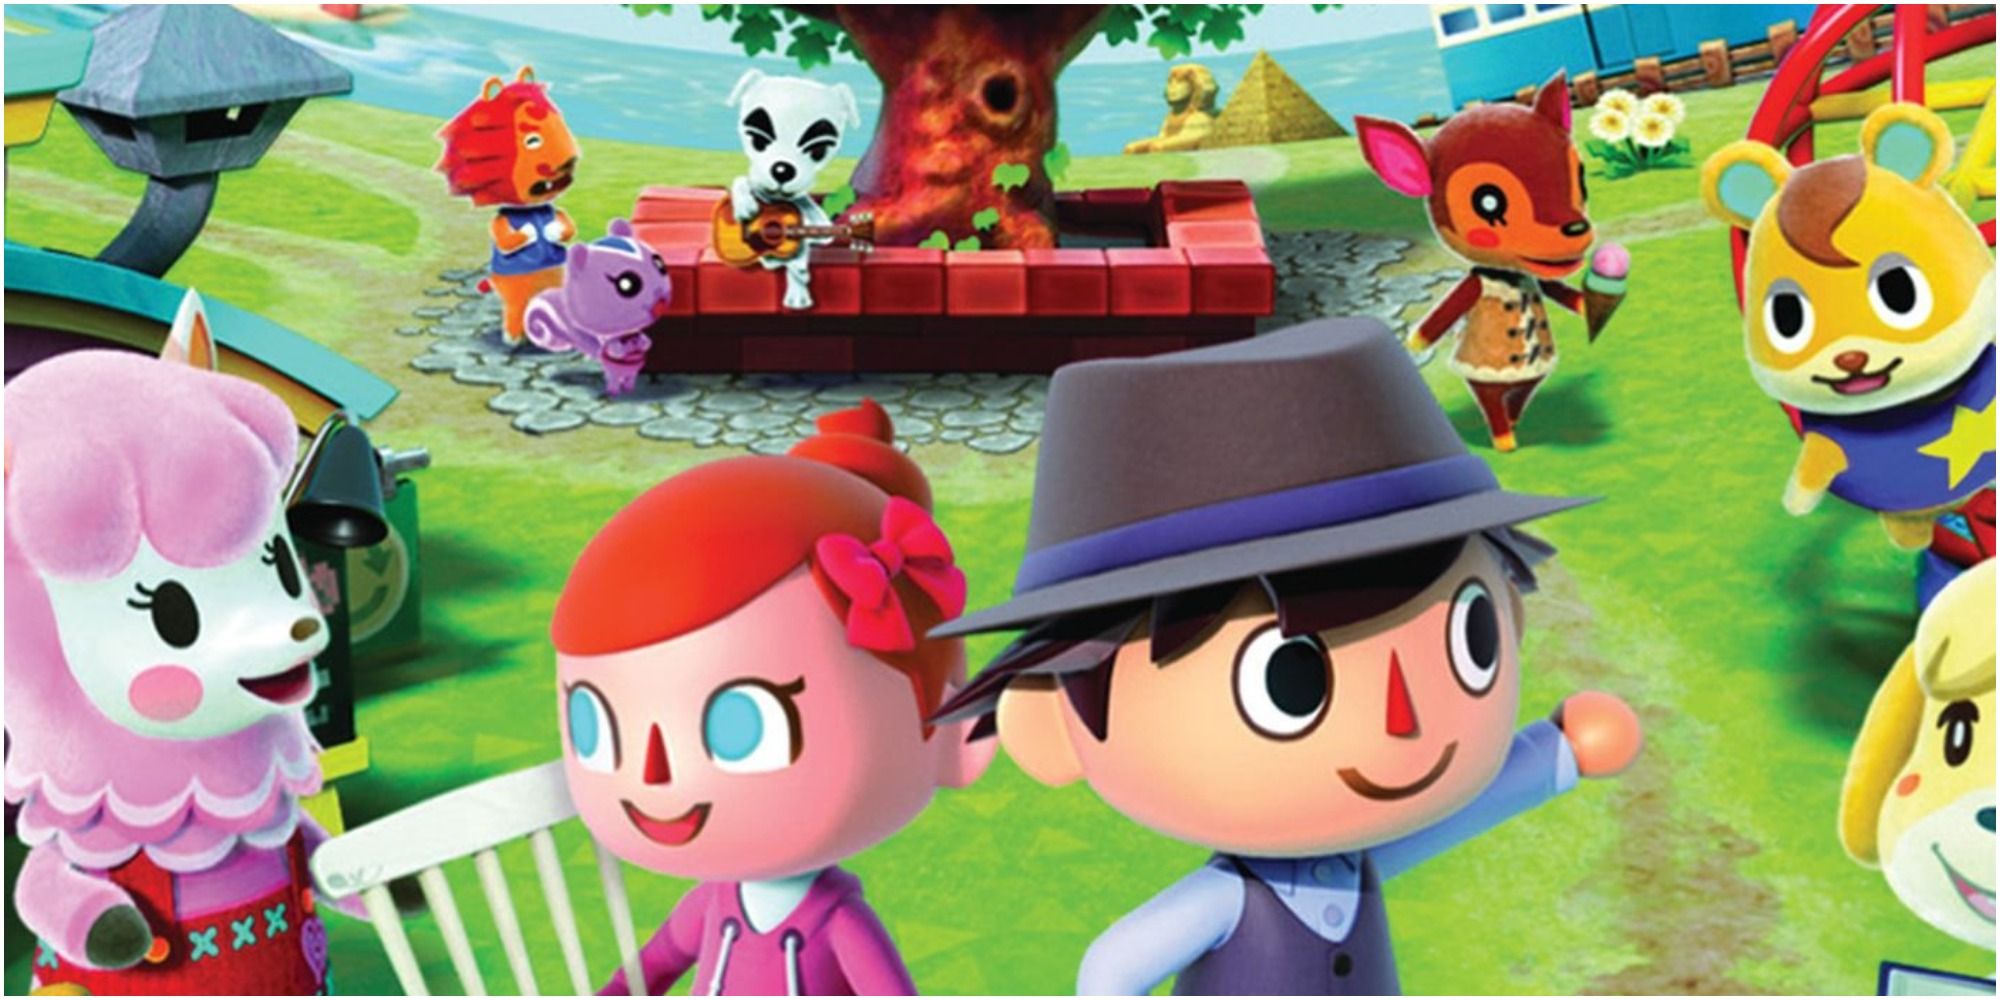 The box art from Animal Crossing: New Leaf. Two human characters are surrounded by villagers and NPCs